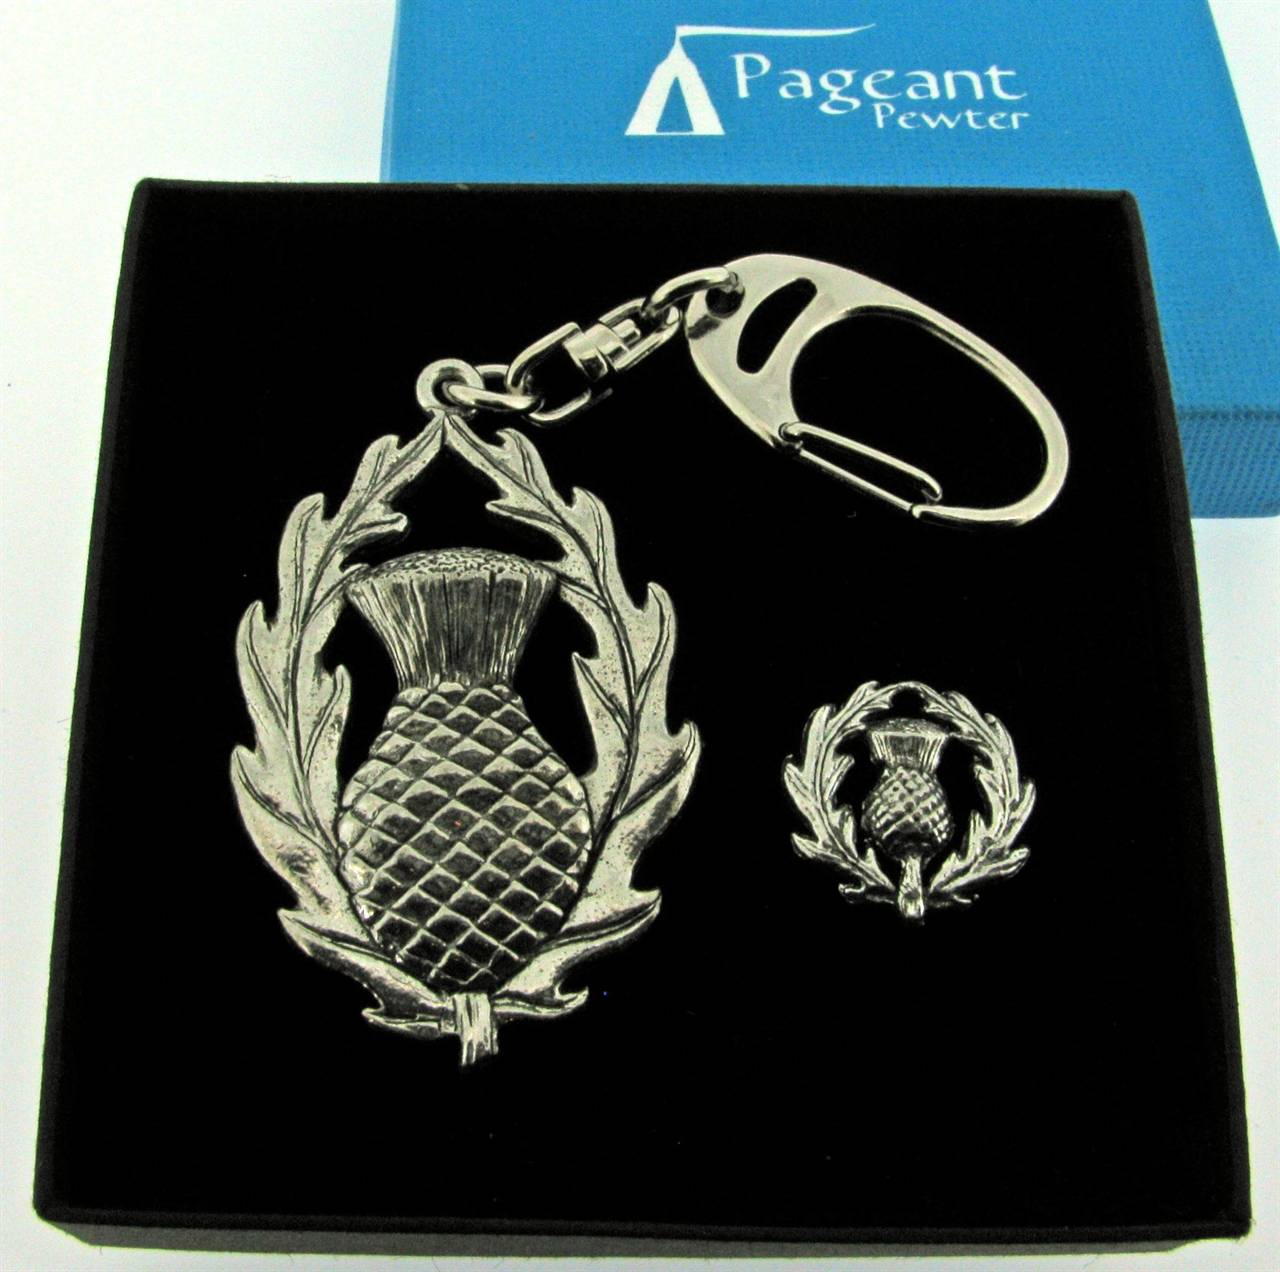 Thistle Keyring Gift Set - high quality pewter gifts from Pageant Pewter